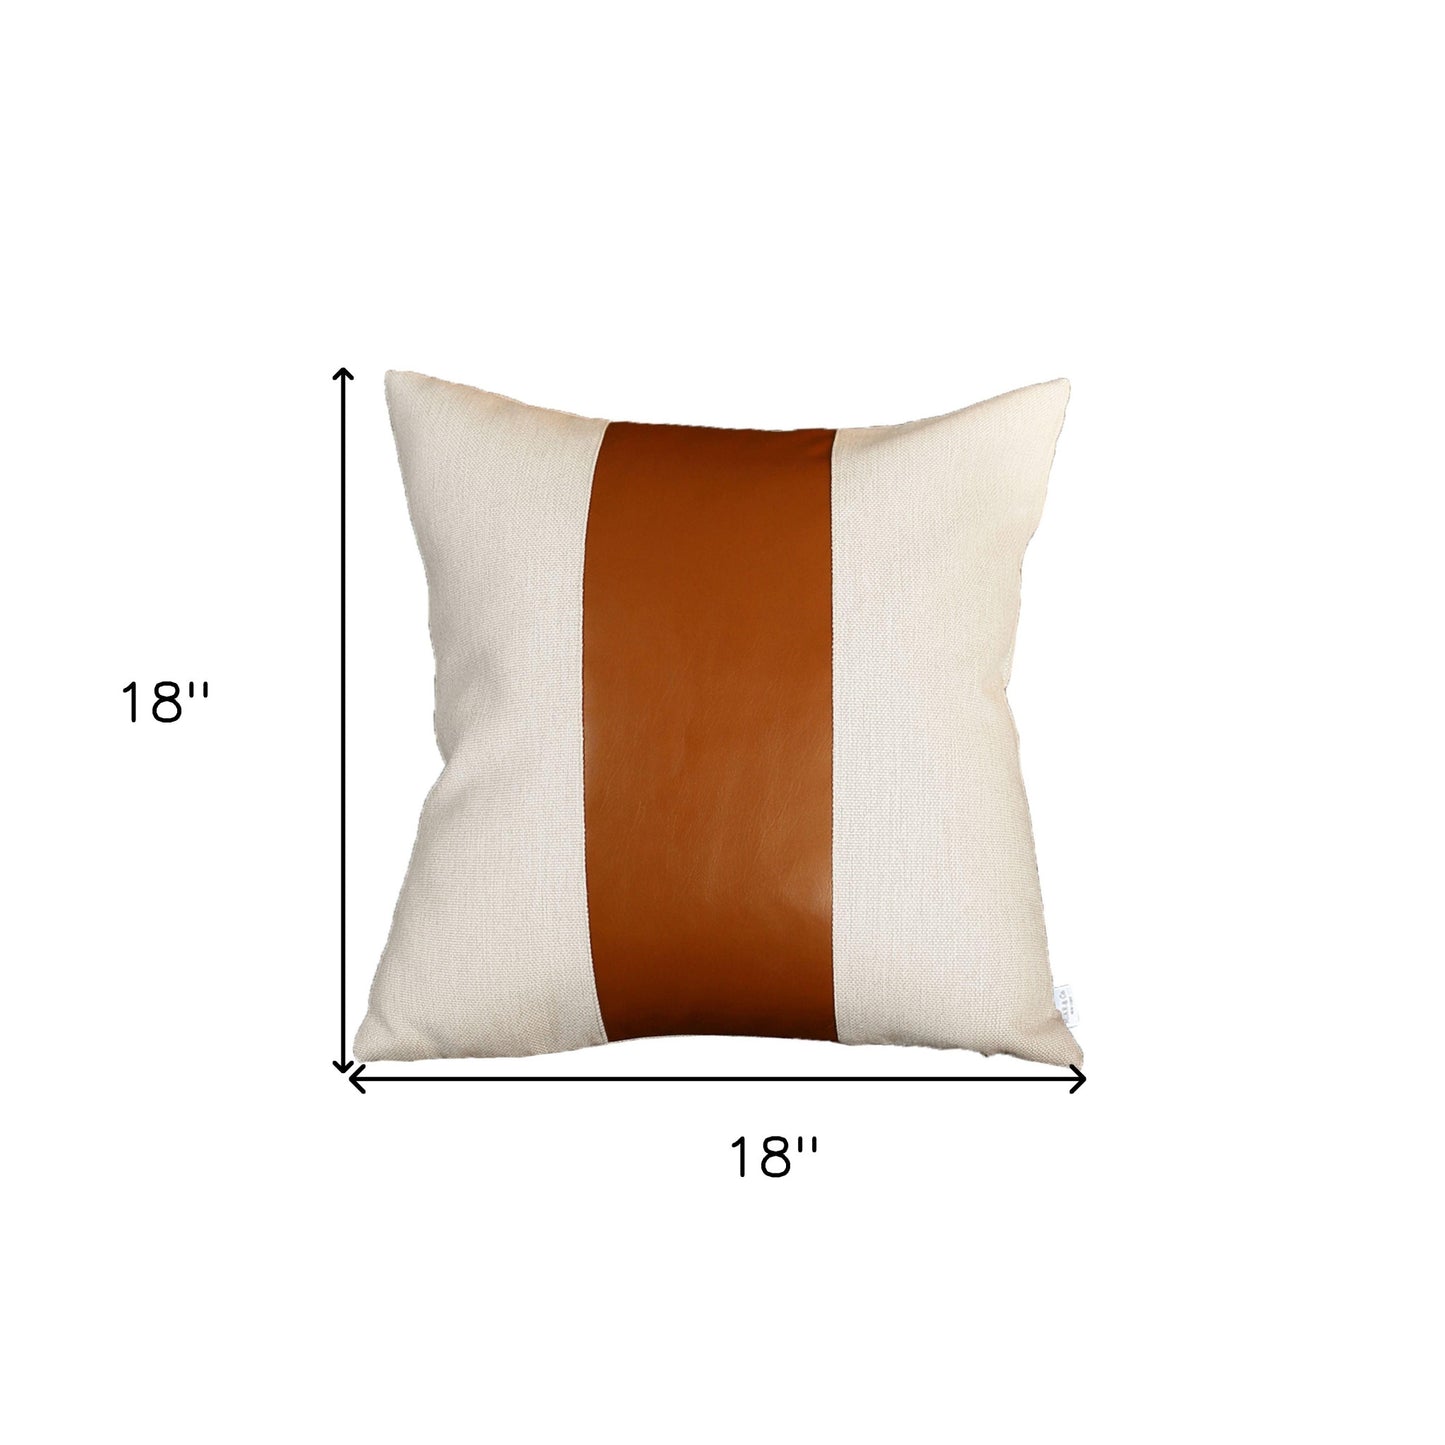 Set Of Two 18" X 18" Brown and Ivory Faux Leather Zippered Pillow